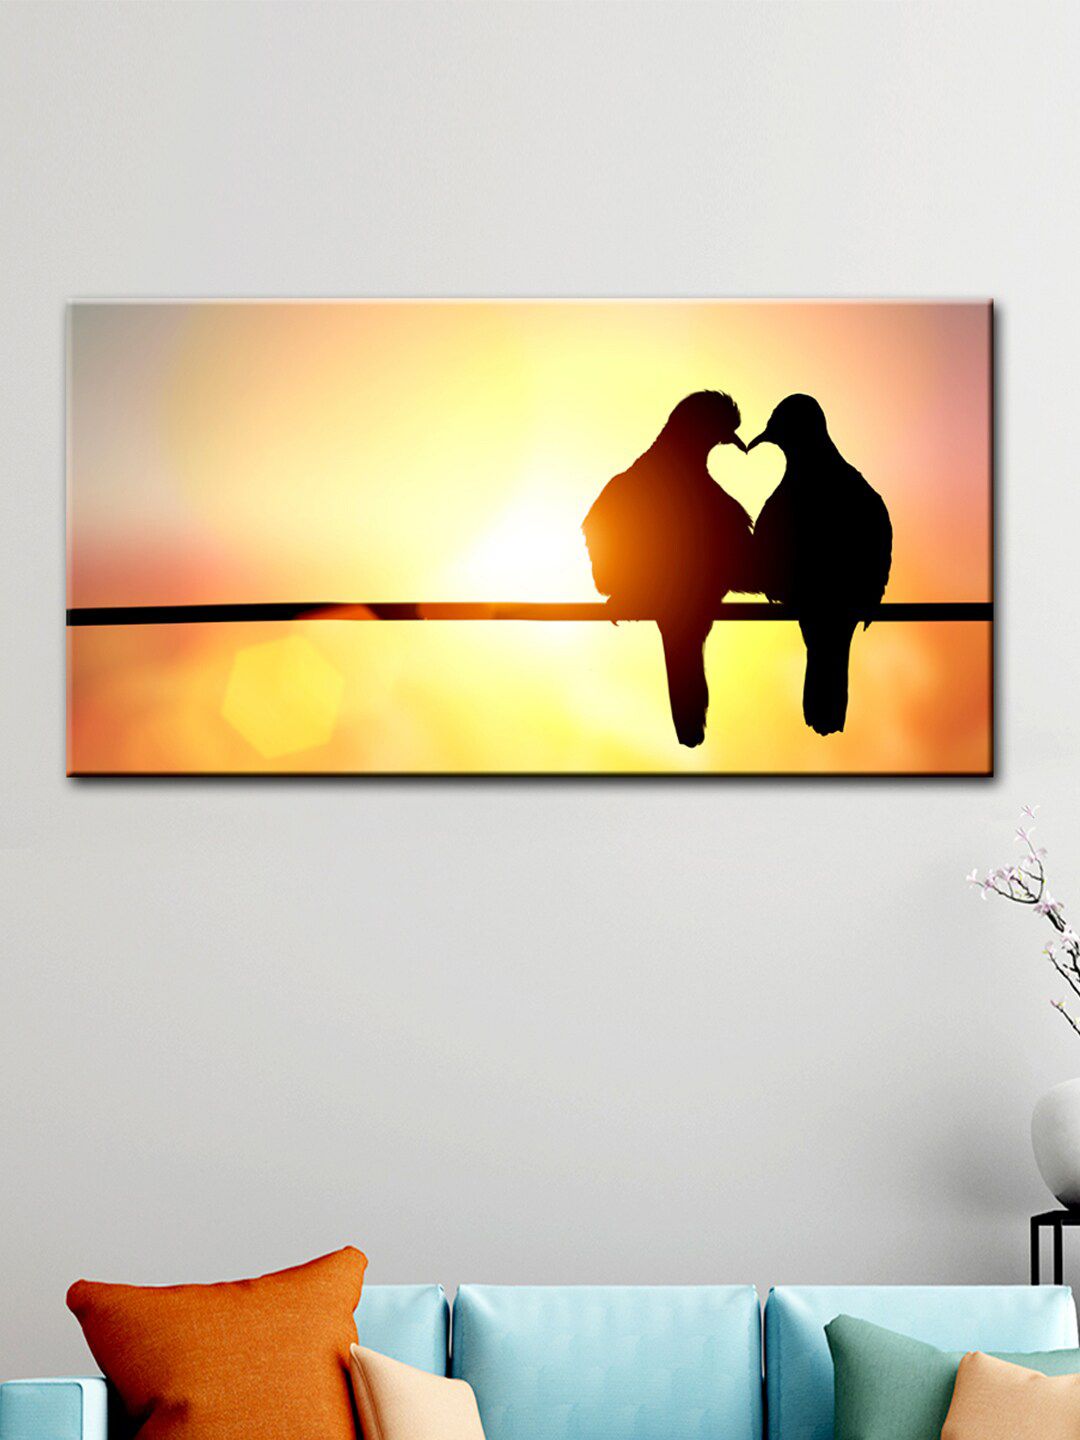 WALLMANTRA Multicoloured Lovebird Scenery Canvas Printed Painting Price in India